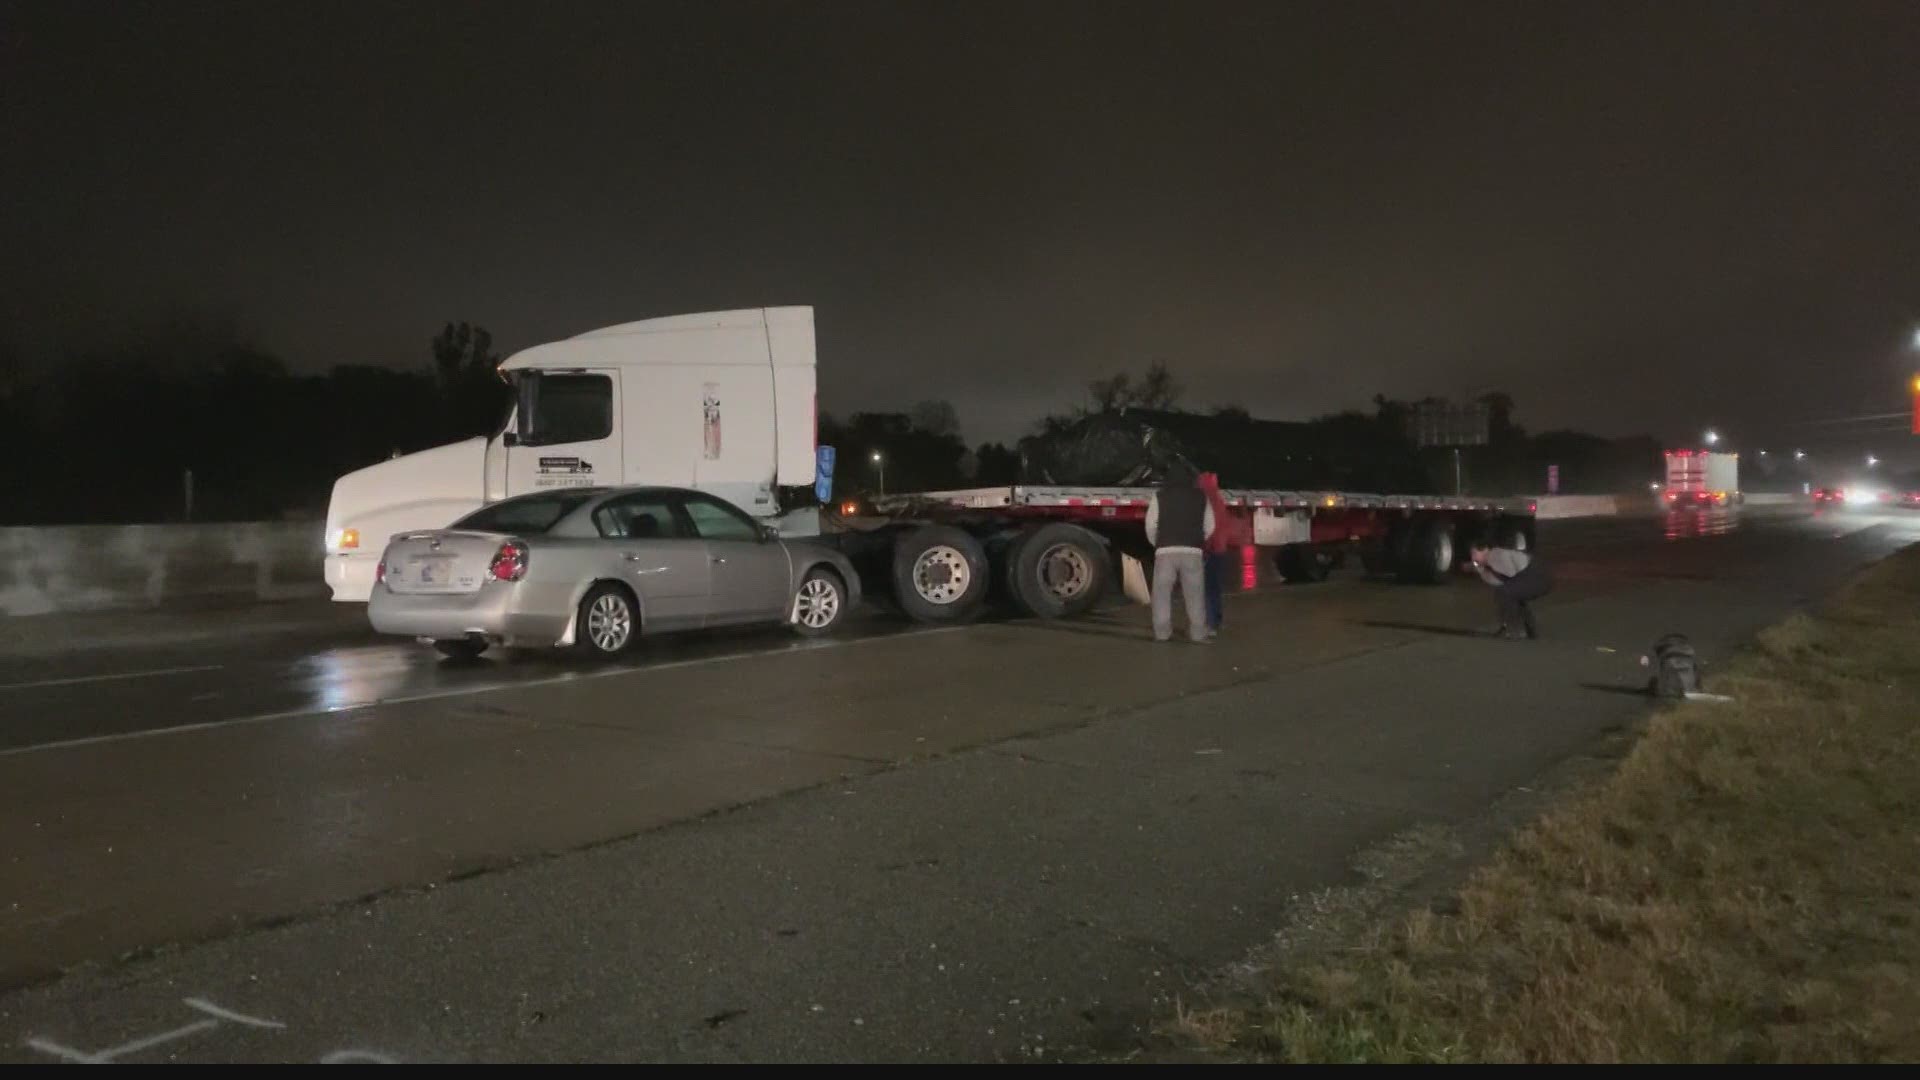 All interstates into downtown Indianapolis were hampered or blocked by accidents involving semis early Monday morning.